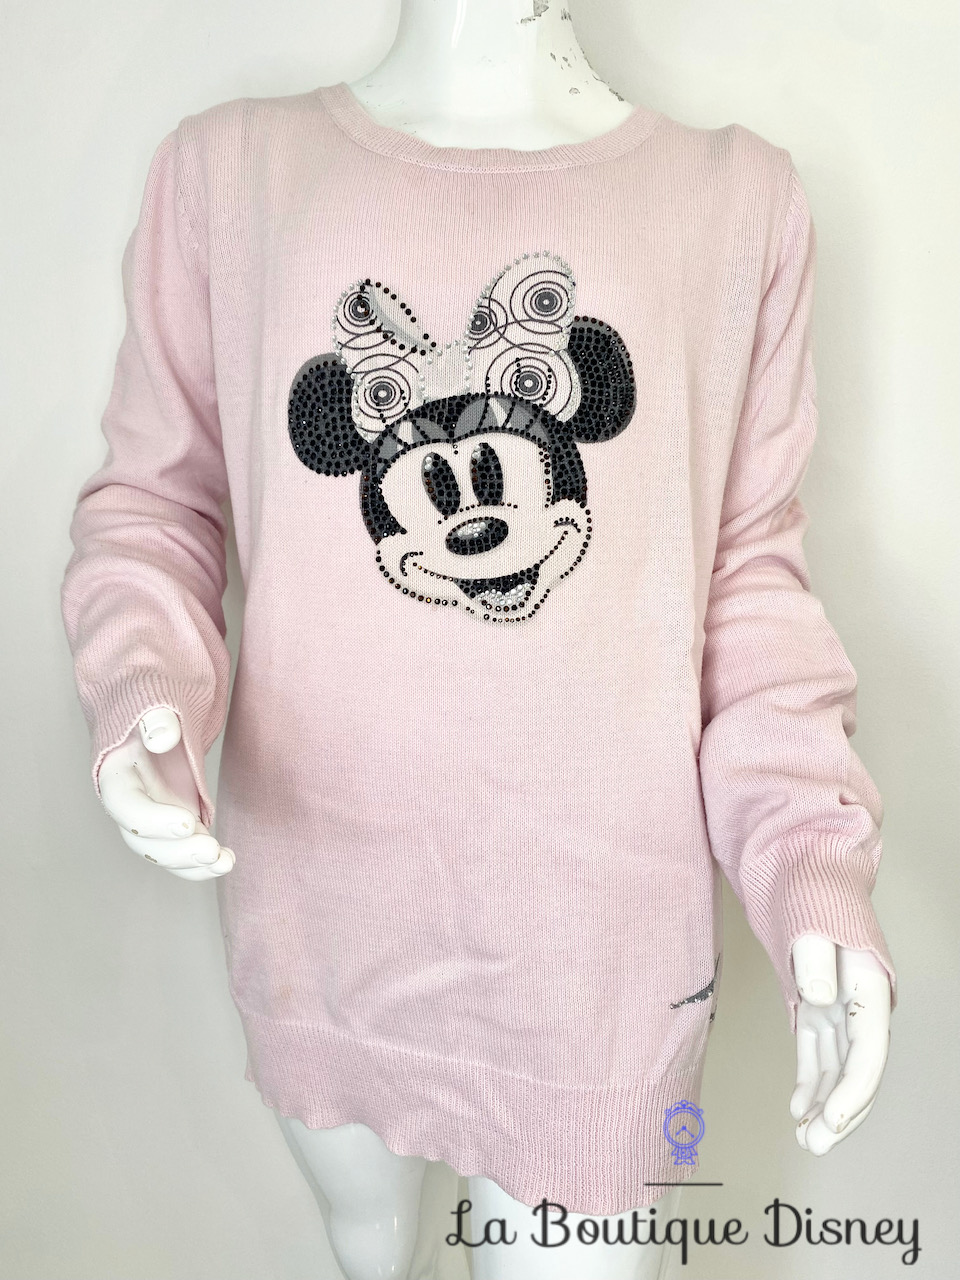 Pull Minnie Mouse Disneyland Paris Disney taille 12 ans rose strass